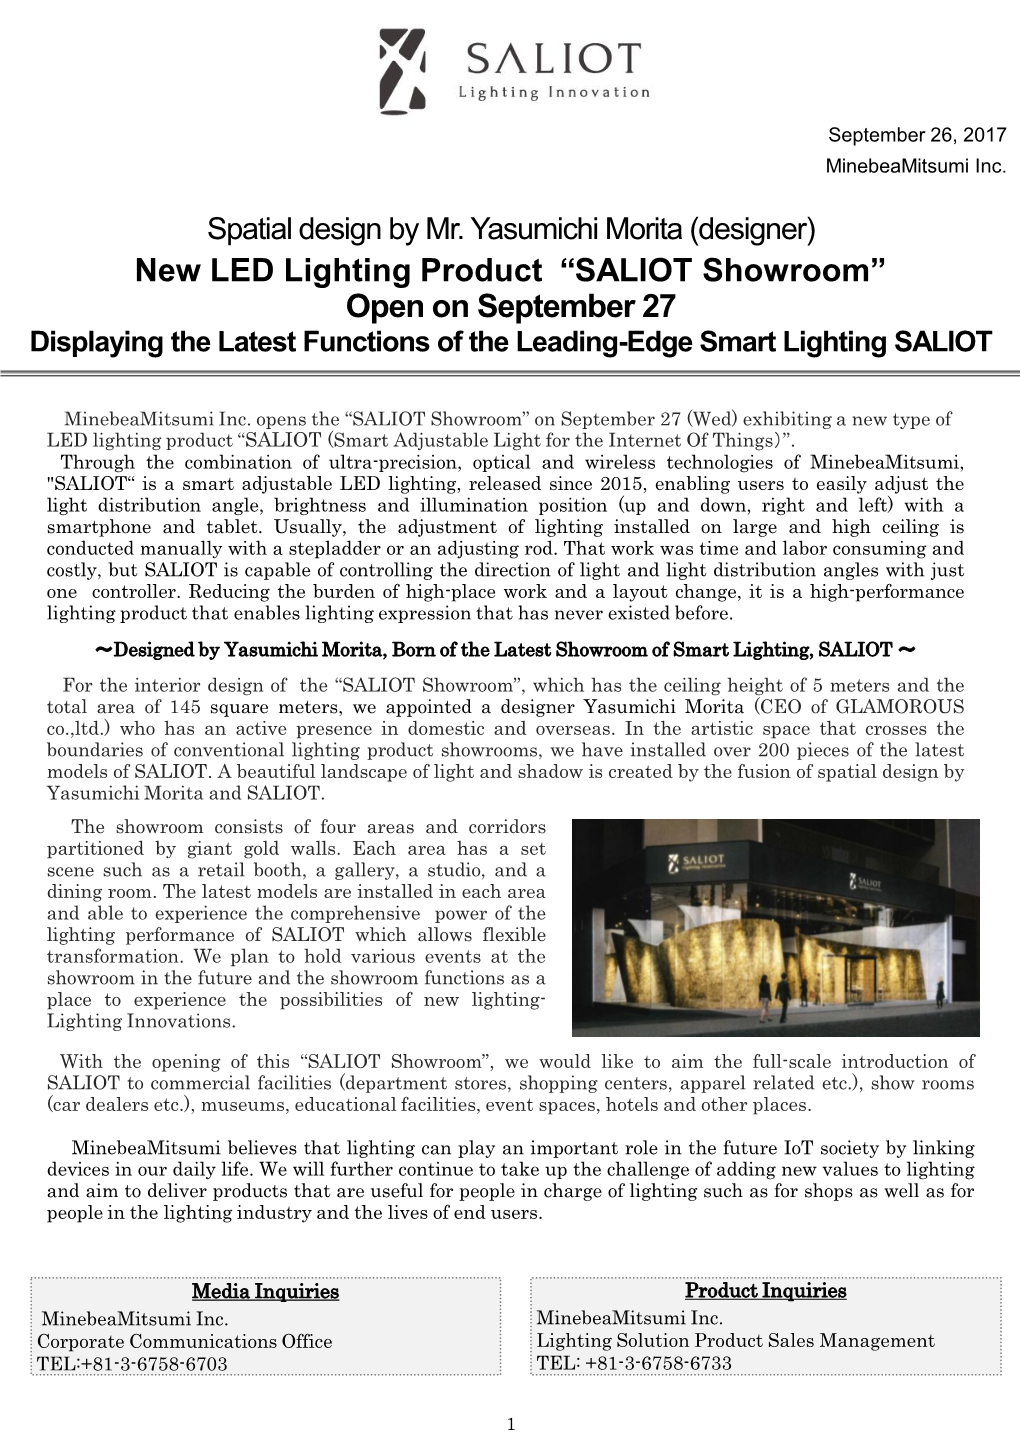 New LED Lighting Product “SALIOT Showroom” Open on September 27 Displaying the Latest Functions of the Leading-Edge Smart Lighting SALIOT